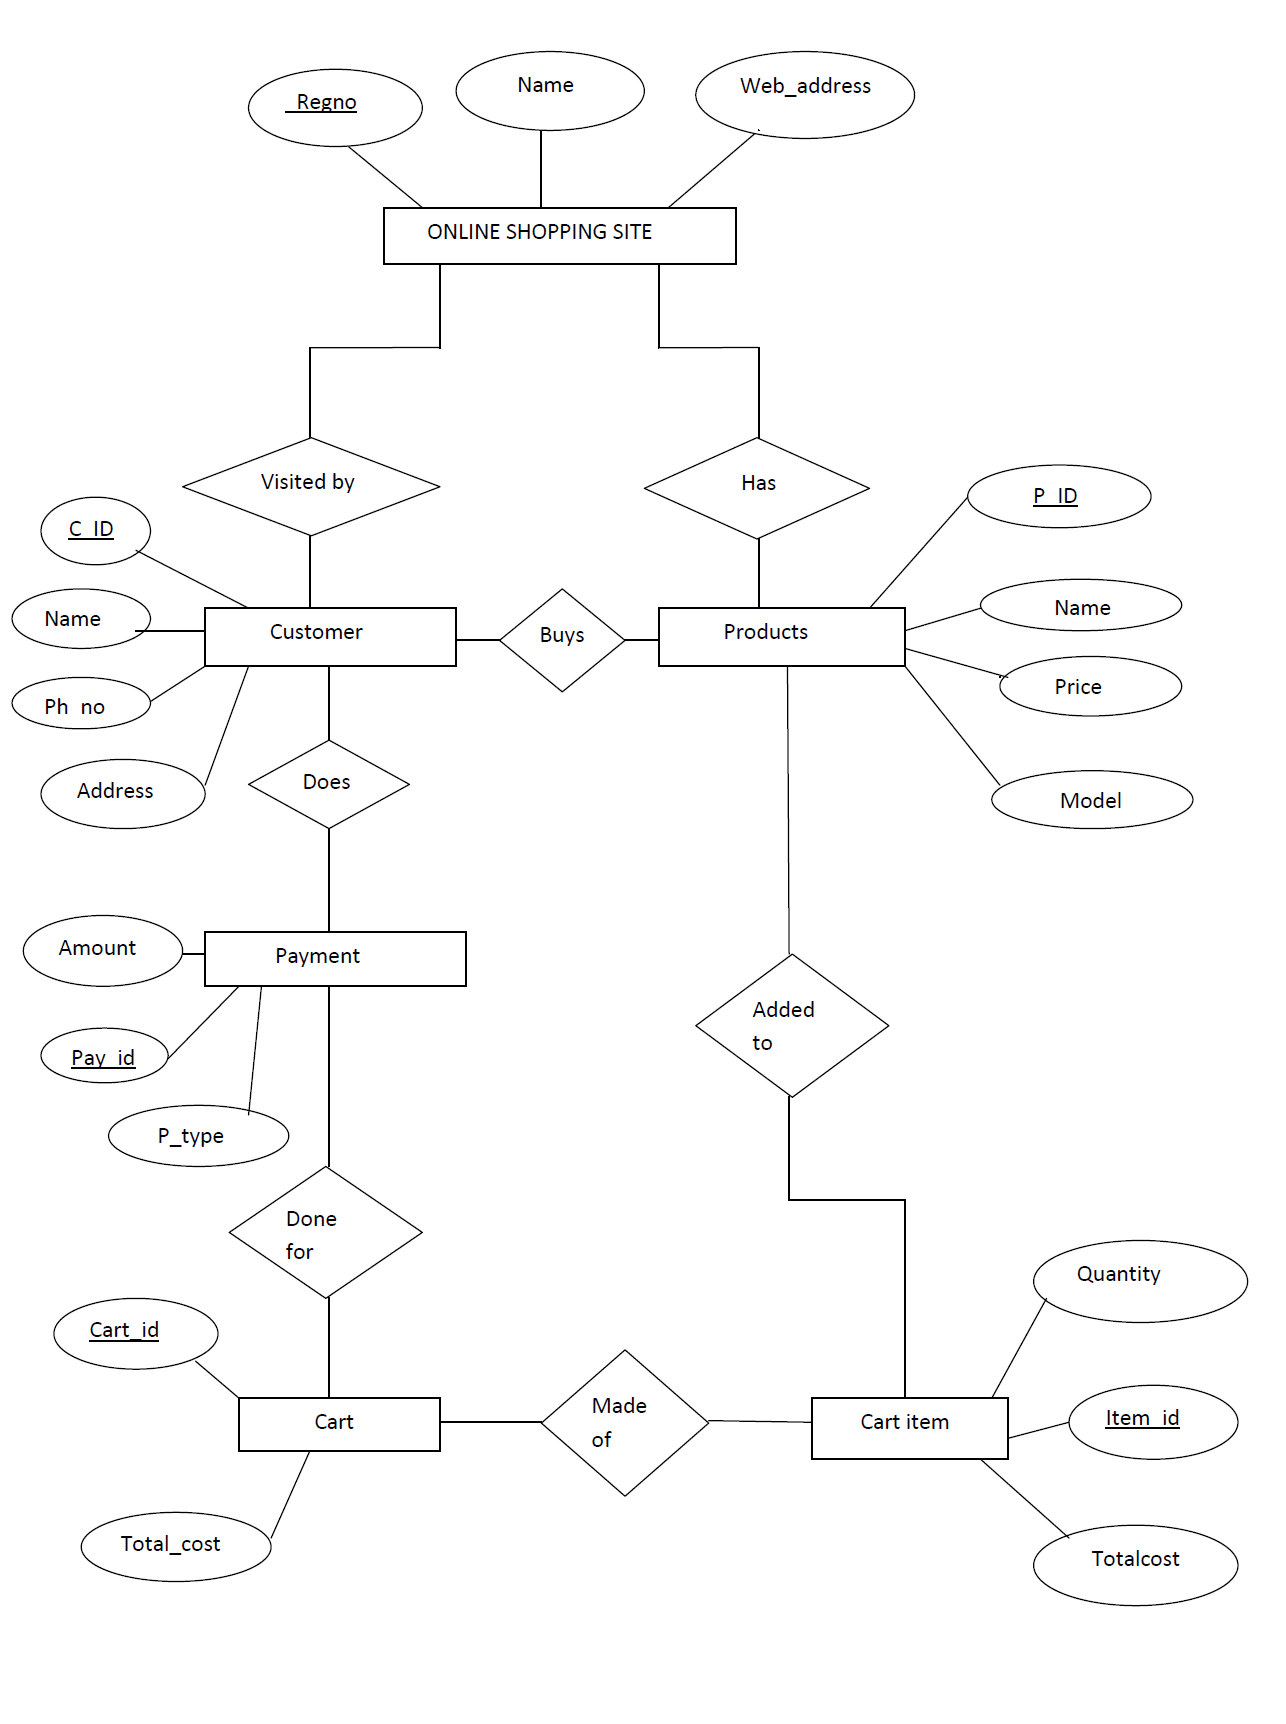 Mapping Er Diagram To Relational Model (Rollno:50) | Lbs for Er To Relational Model